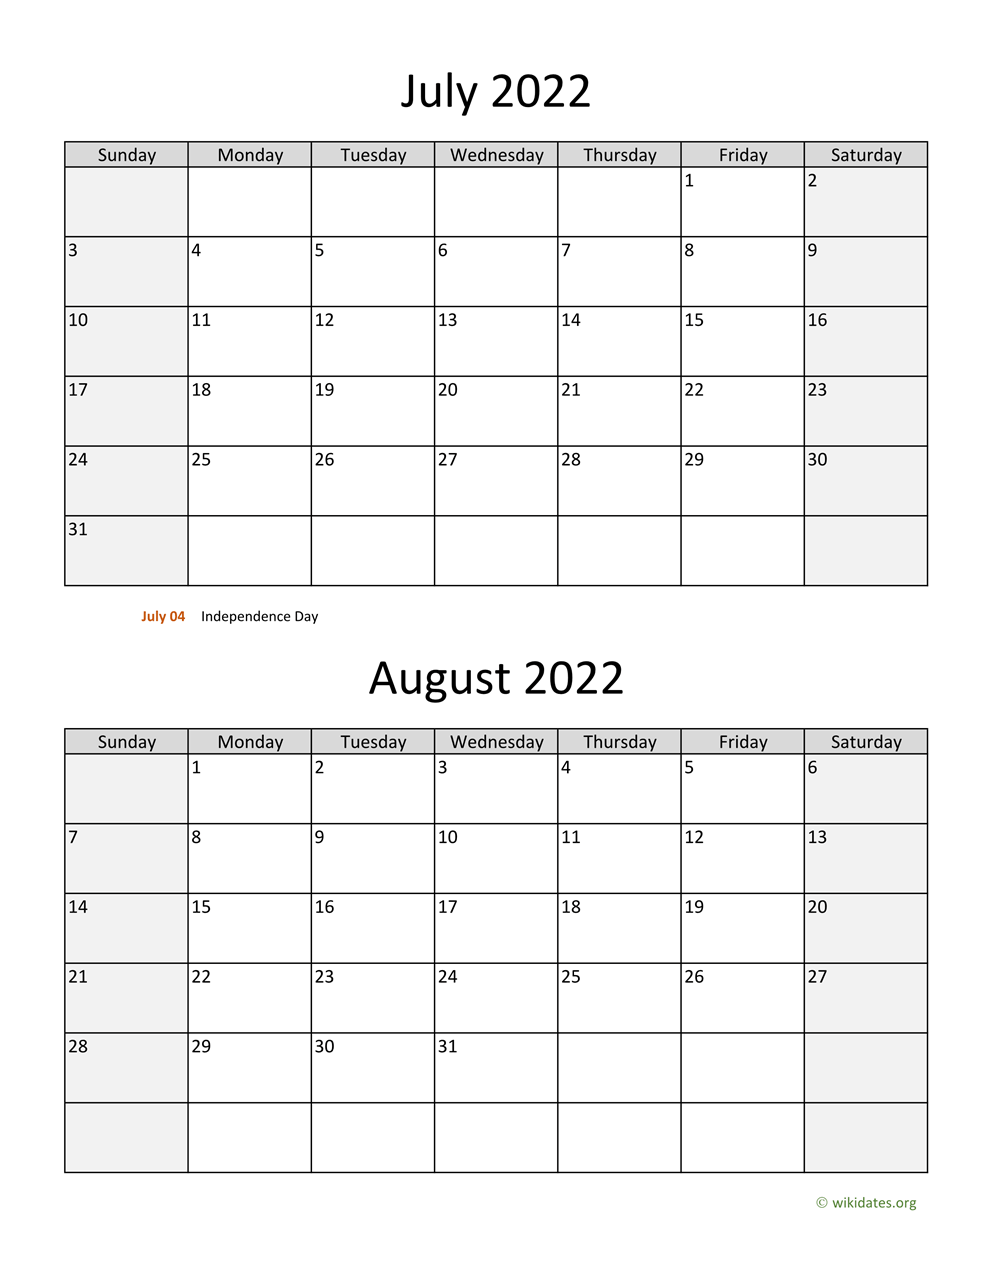 June And July 2022 Calendar July And August 2022 Calendar | Wikidates.org